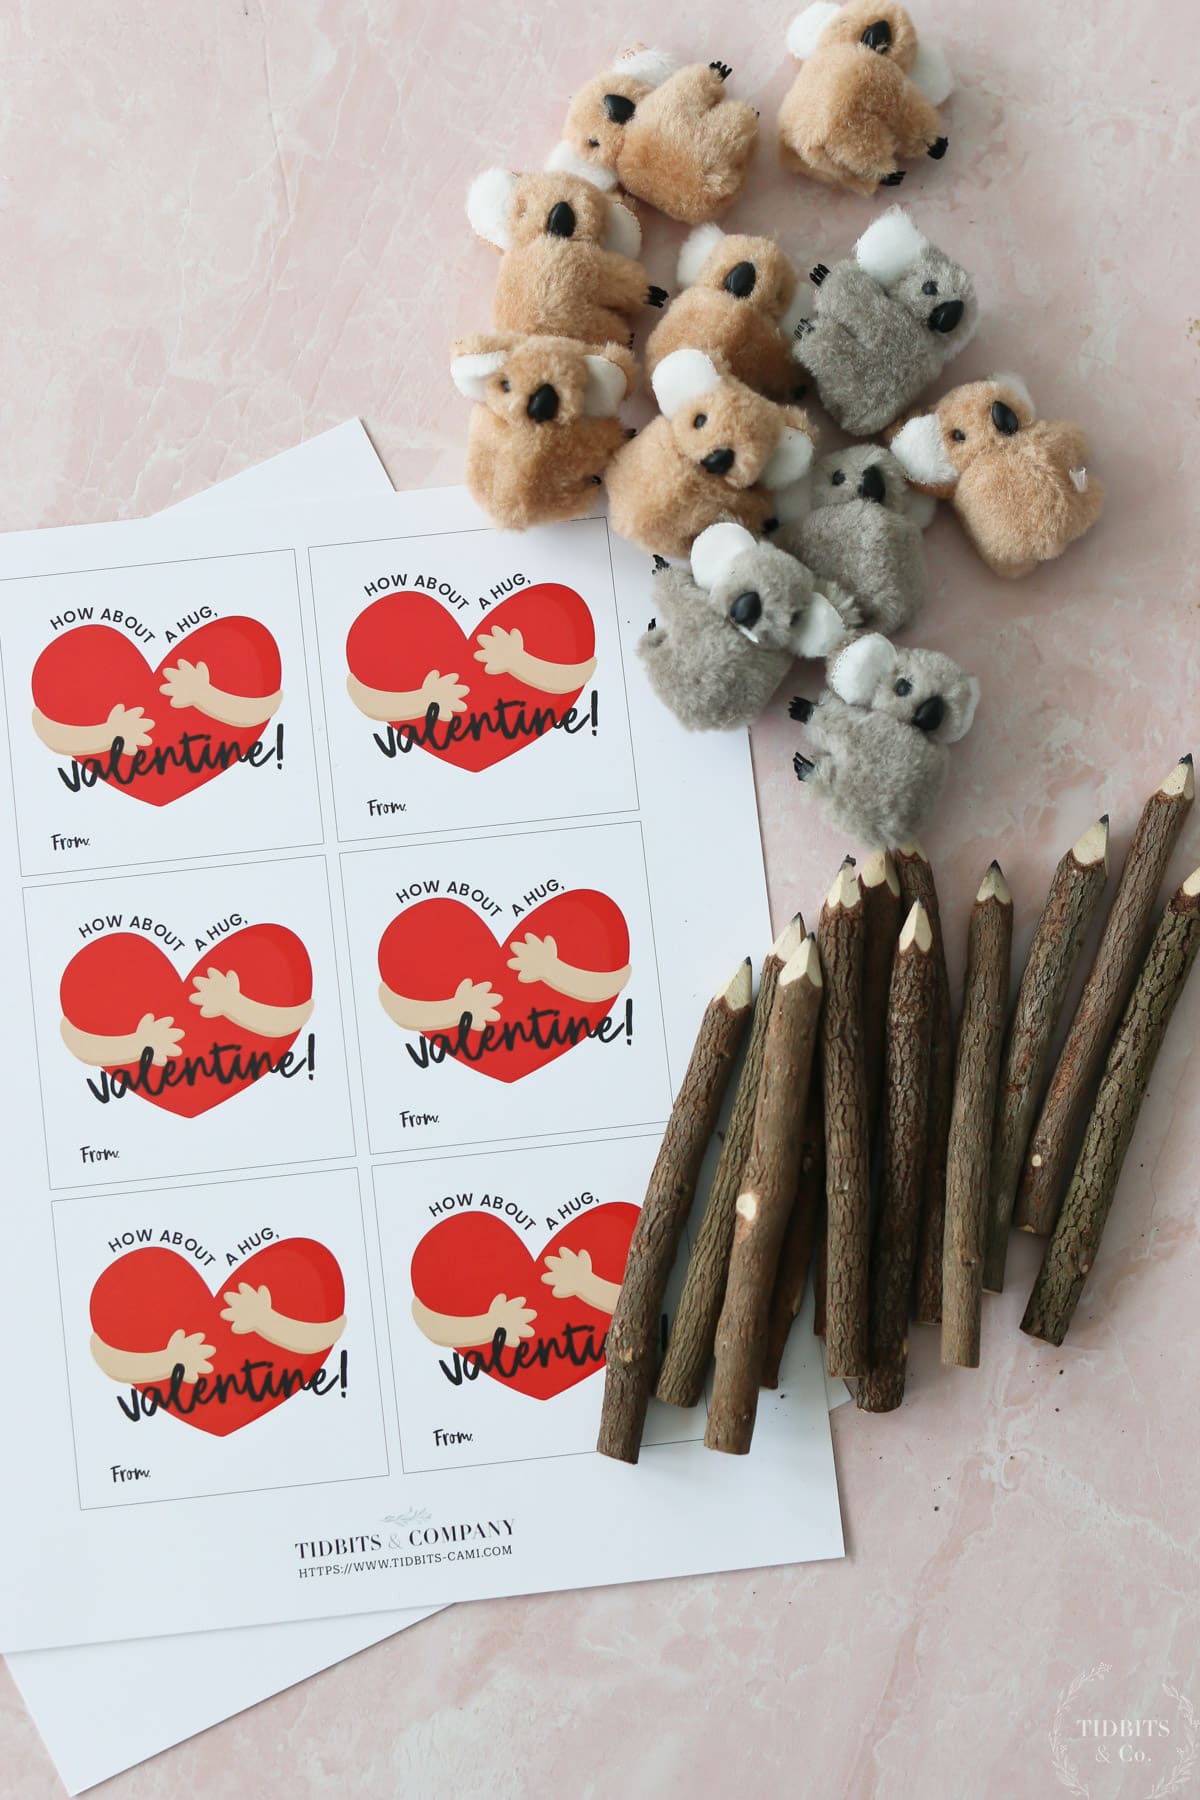 Printable valentine cards, pencils and koala bear clips for valentine gifts